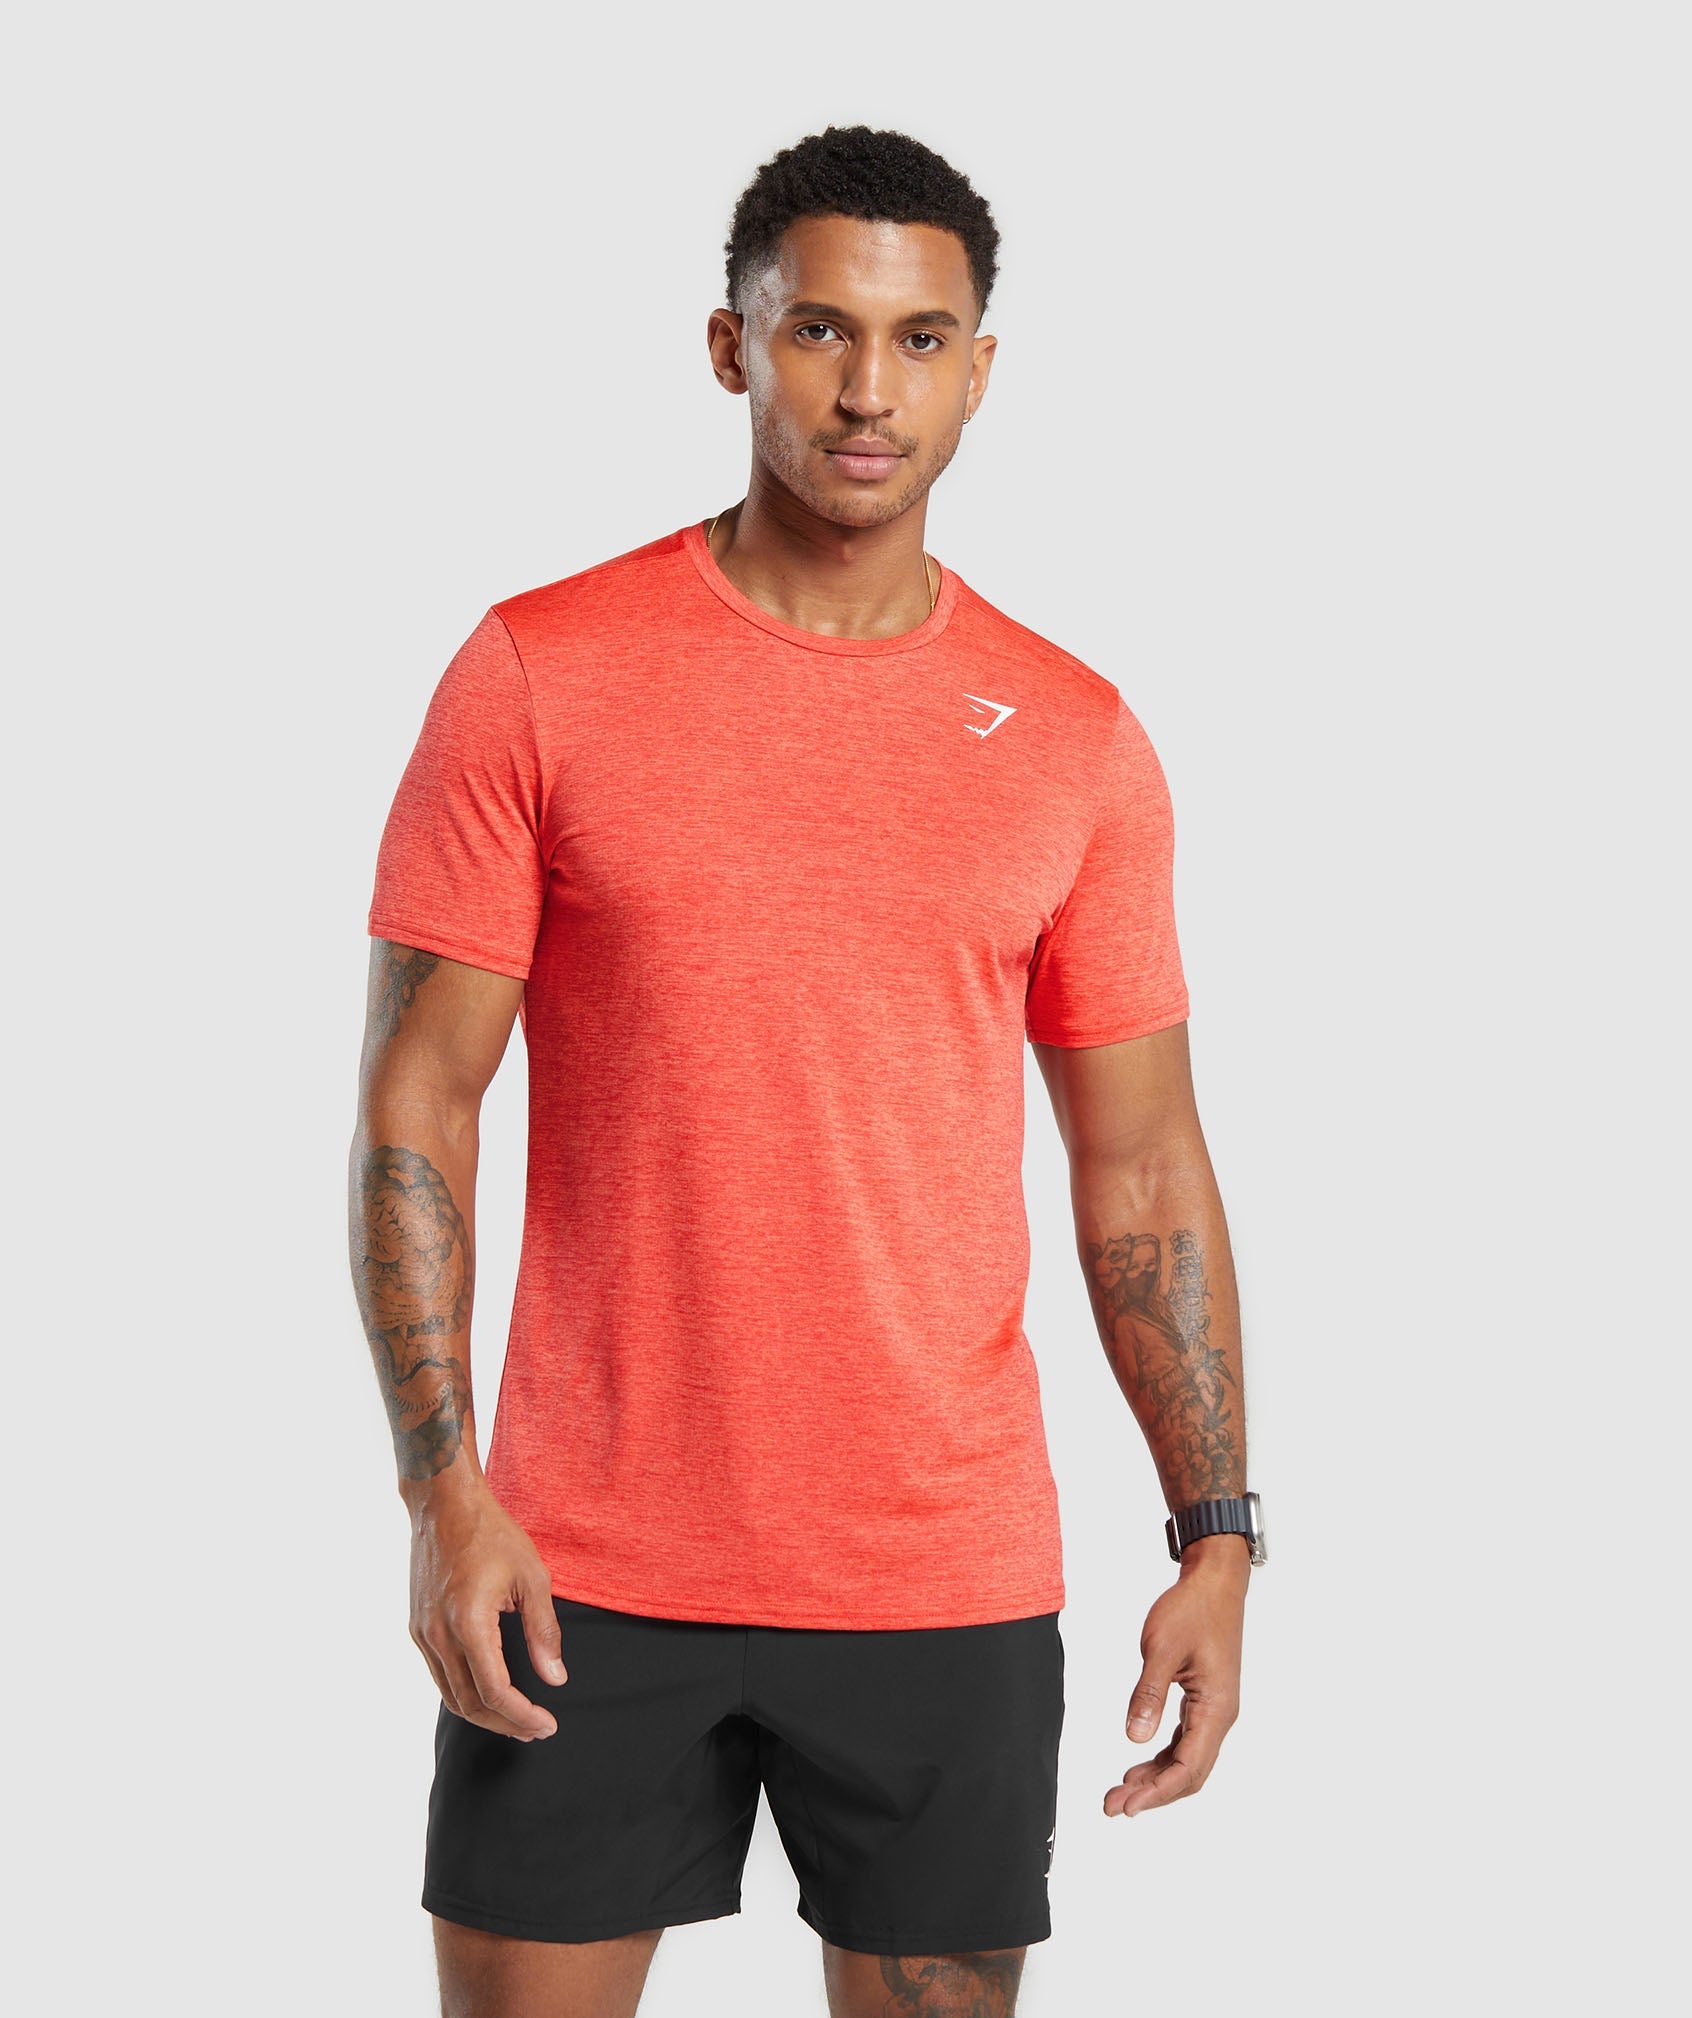 Arrival Marl T-Shirt in Pow Red/Wannabe Orange Marl - view 1